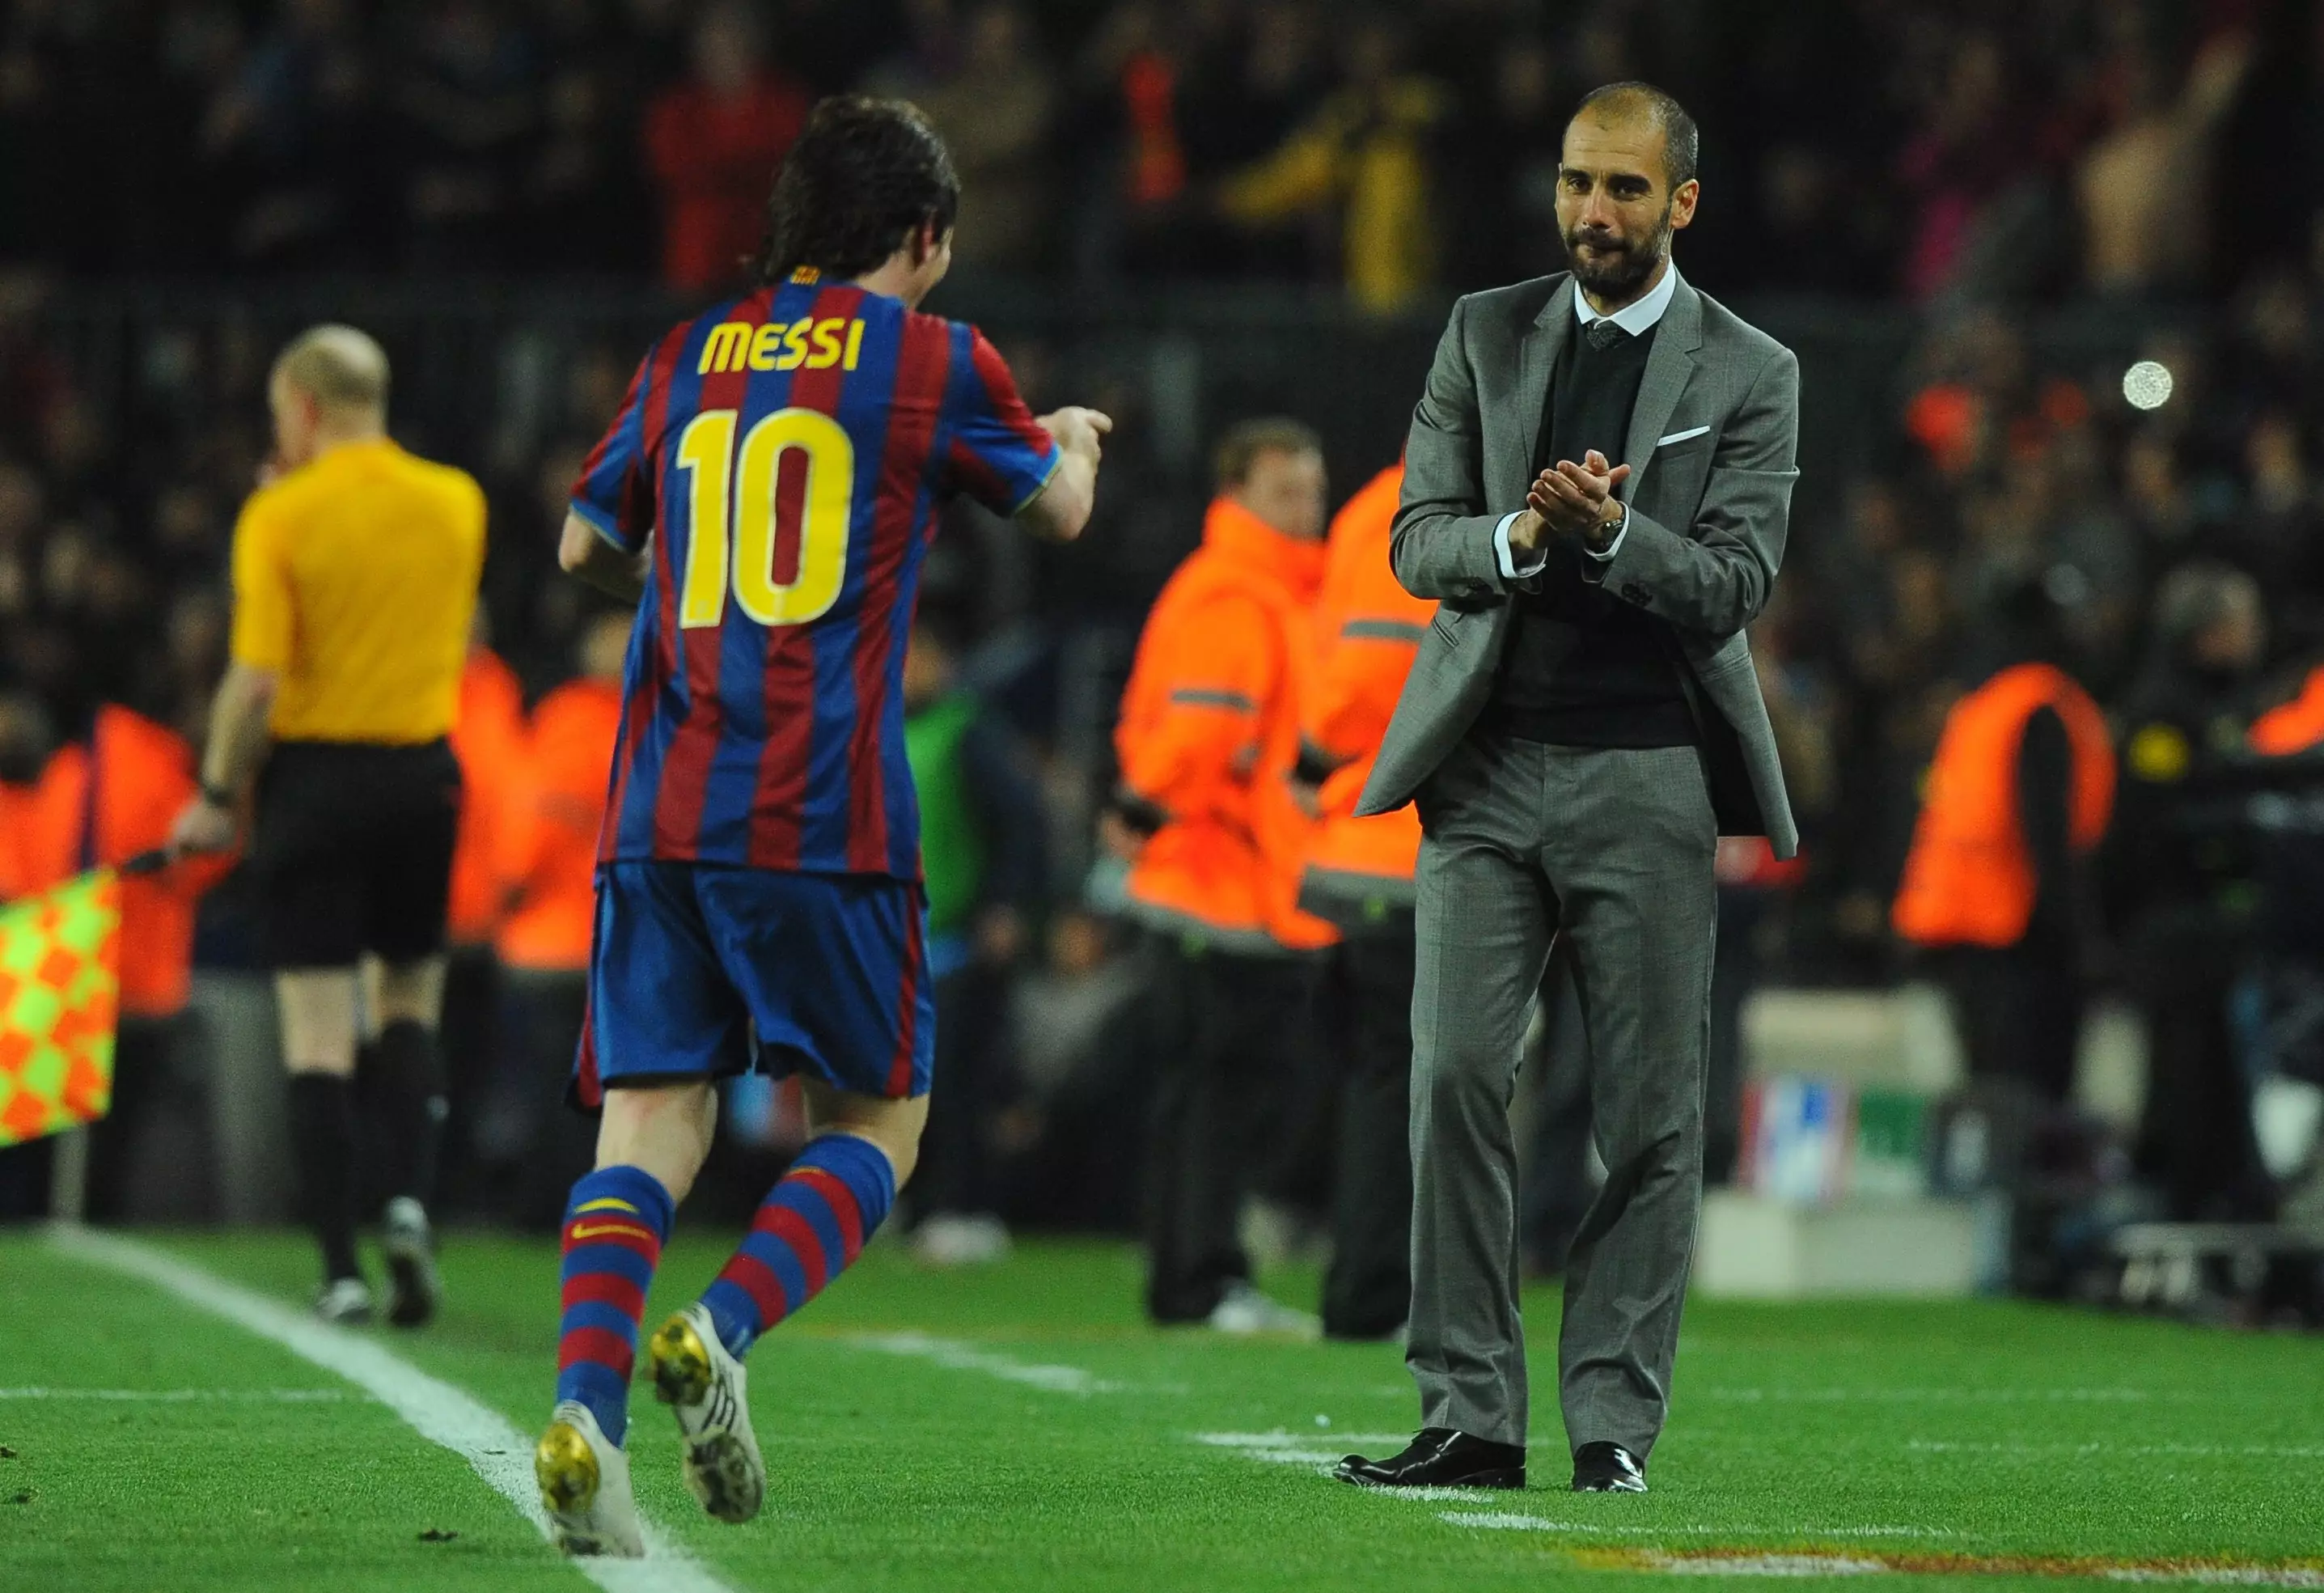 Messi and Guardiola had a good relationship at Barcelona. Image: PA Images